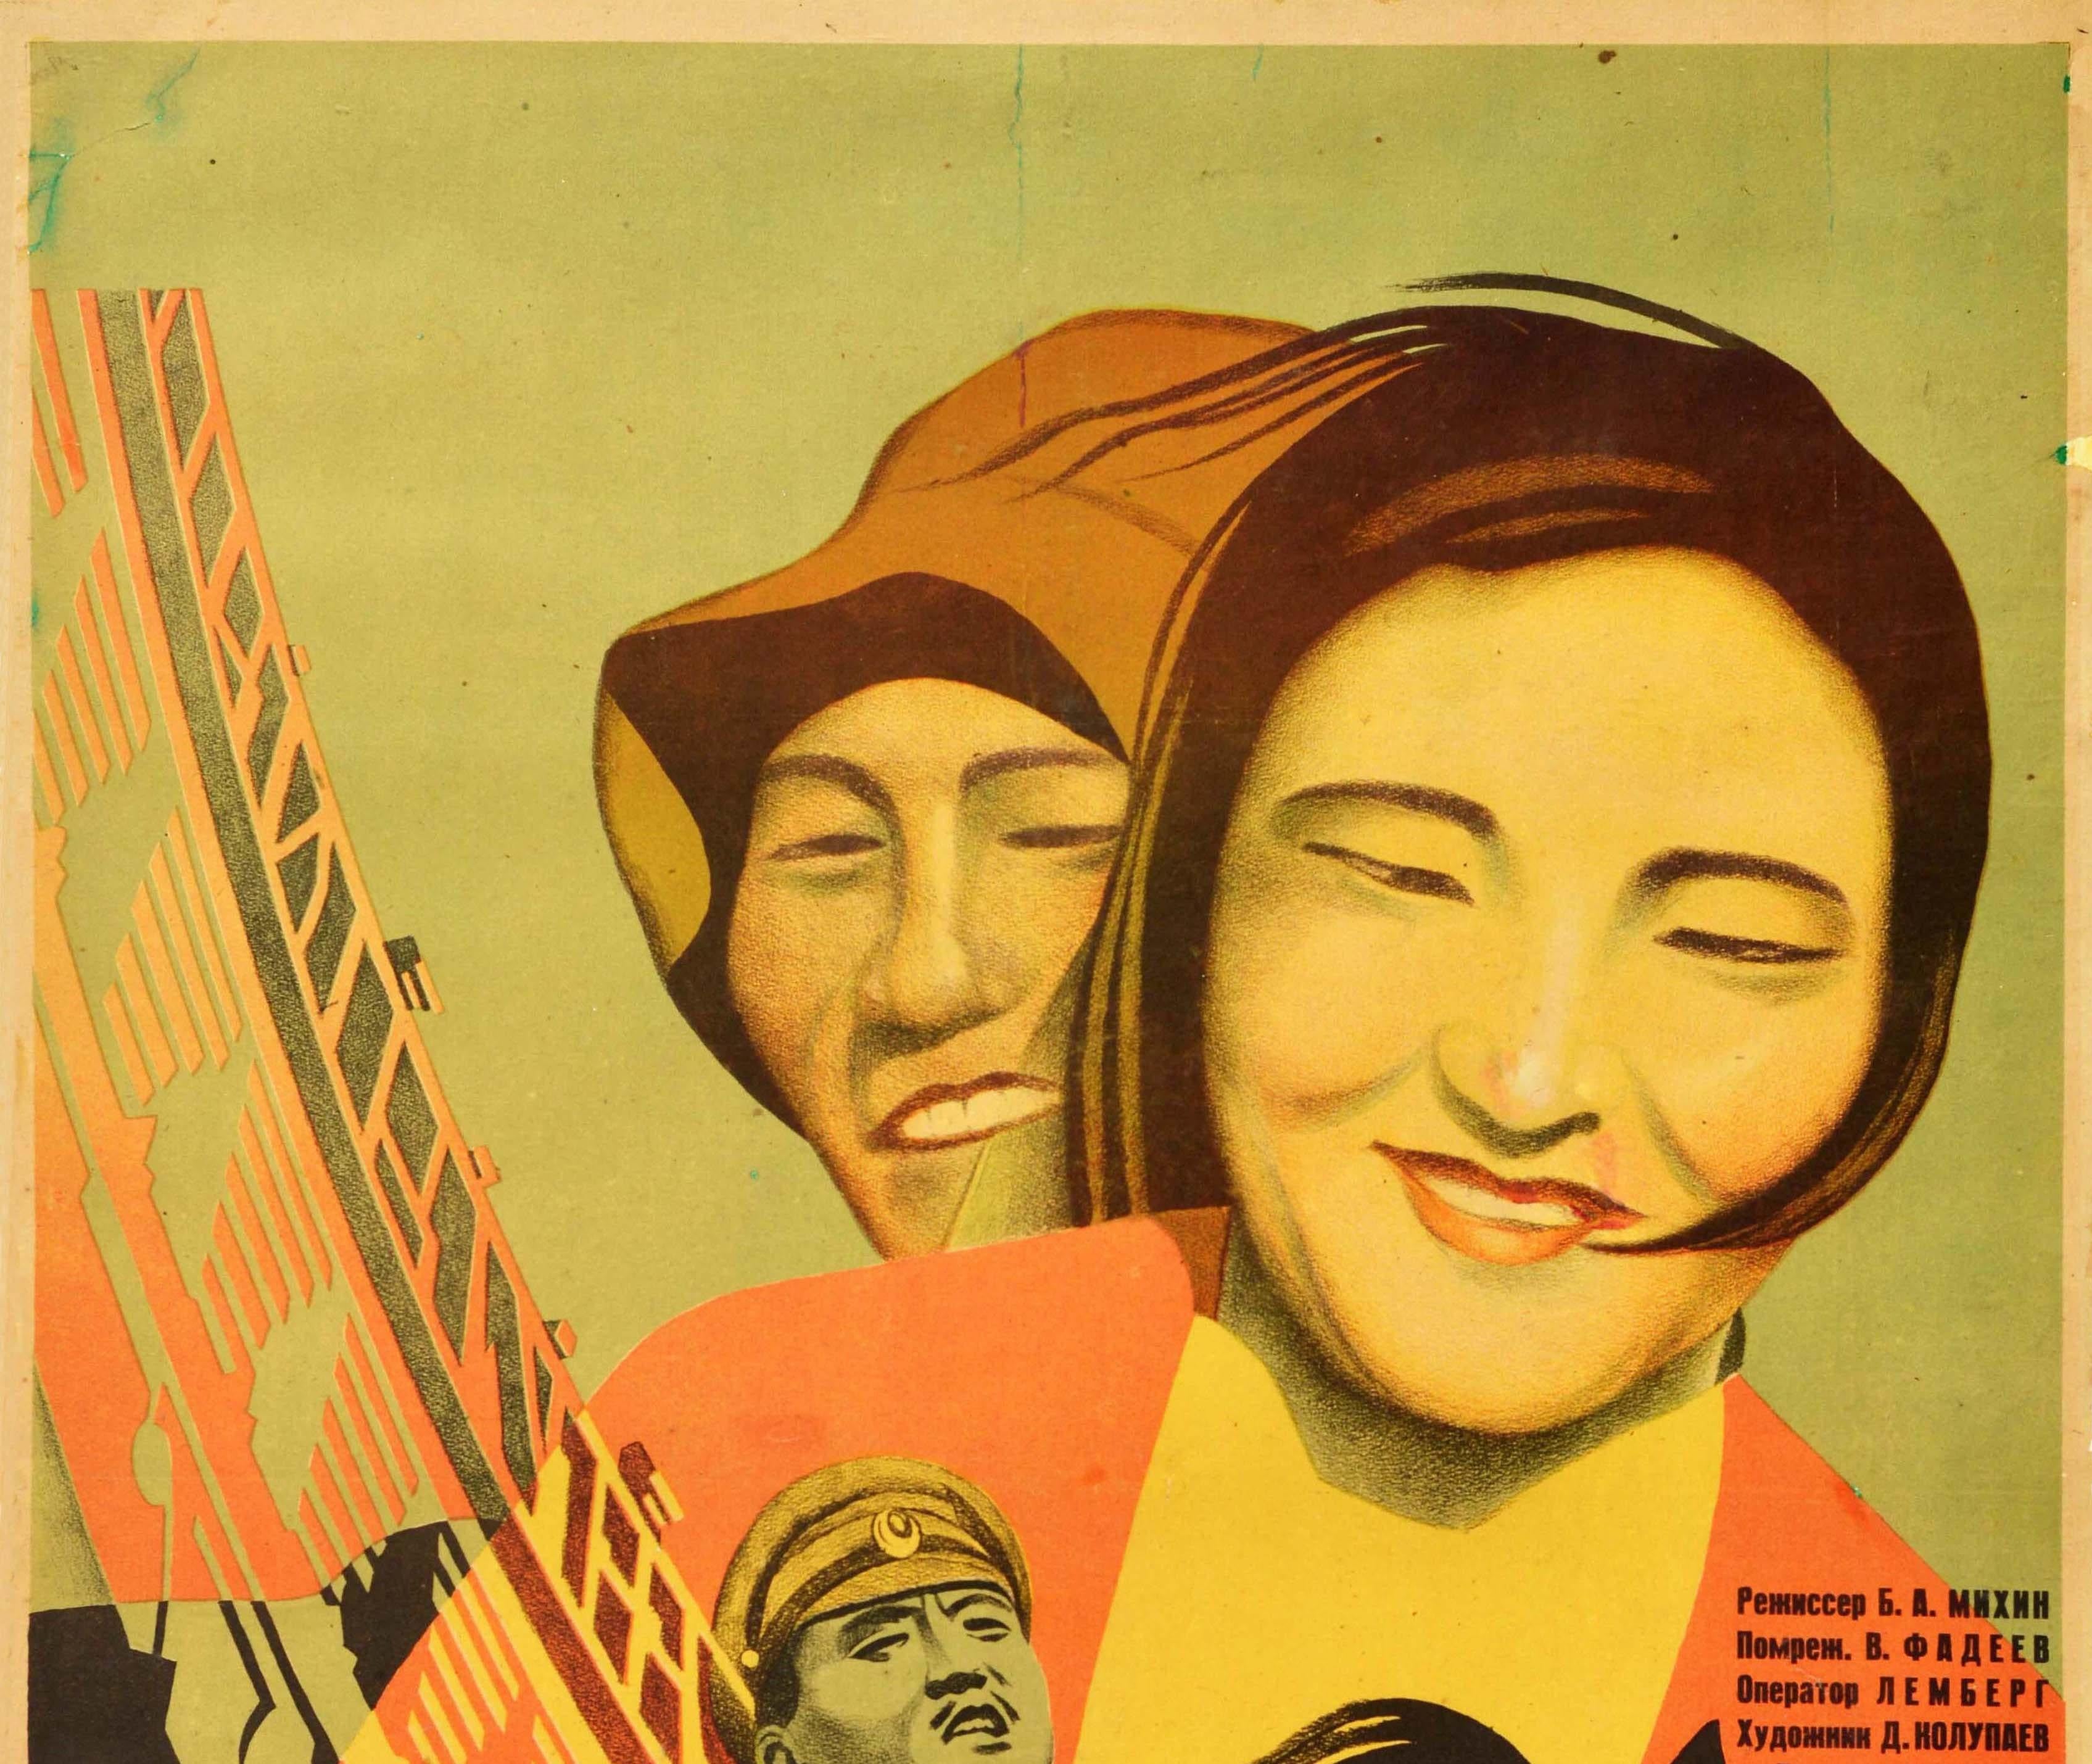 Original vintage cinema poster for a Soviet film - Knyaz Tseren / Prince Tseren - directed by Boris Mihin and starring Eldashin and Nahashkiev, the screenplay written by E. Klein based on a 1925 autobiographical novel The Son of Mudresh by the